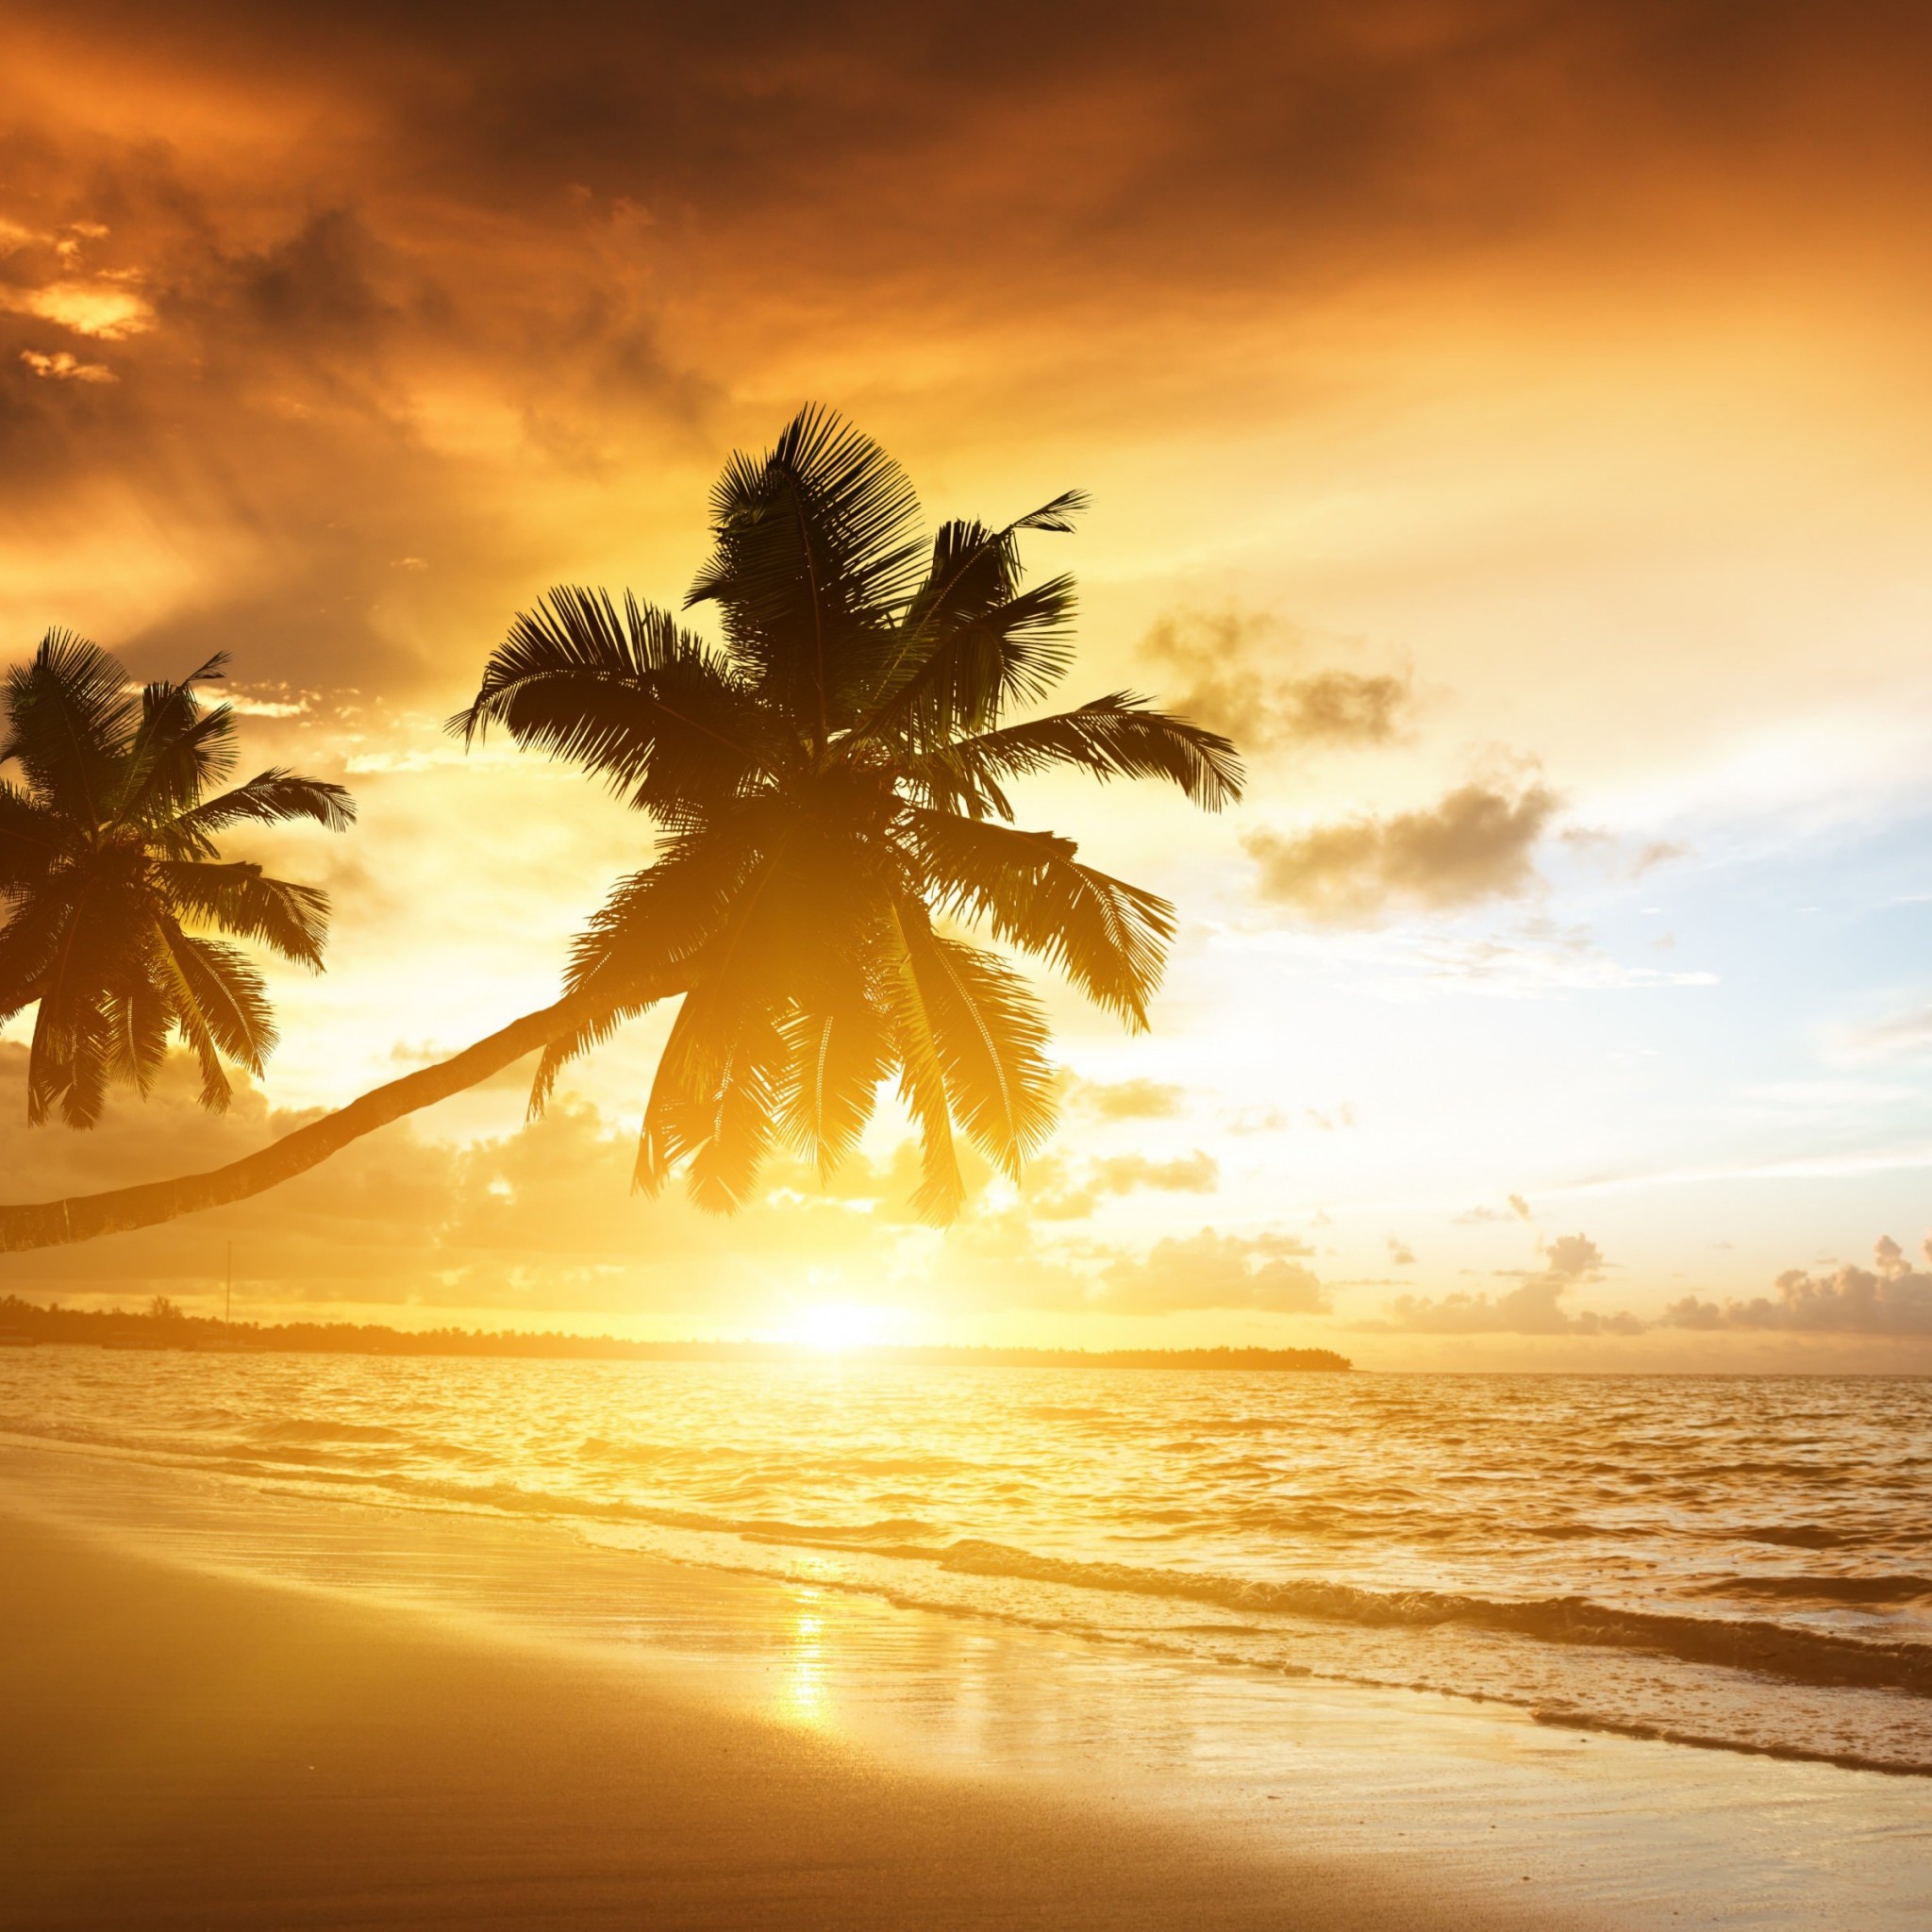 Beach With Palm Trees At Sunset Wallpaper for Google Nexus 9